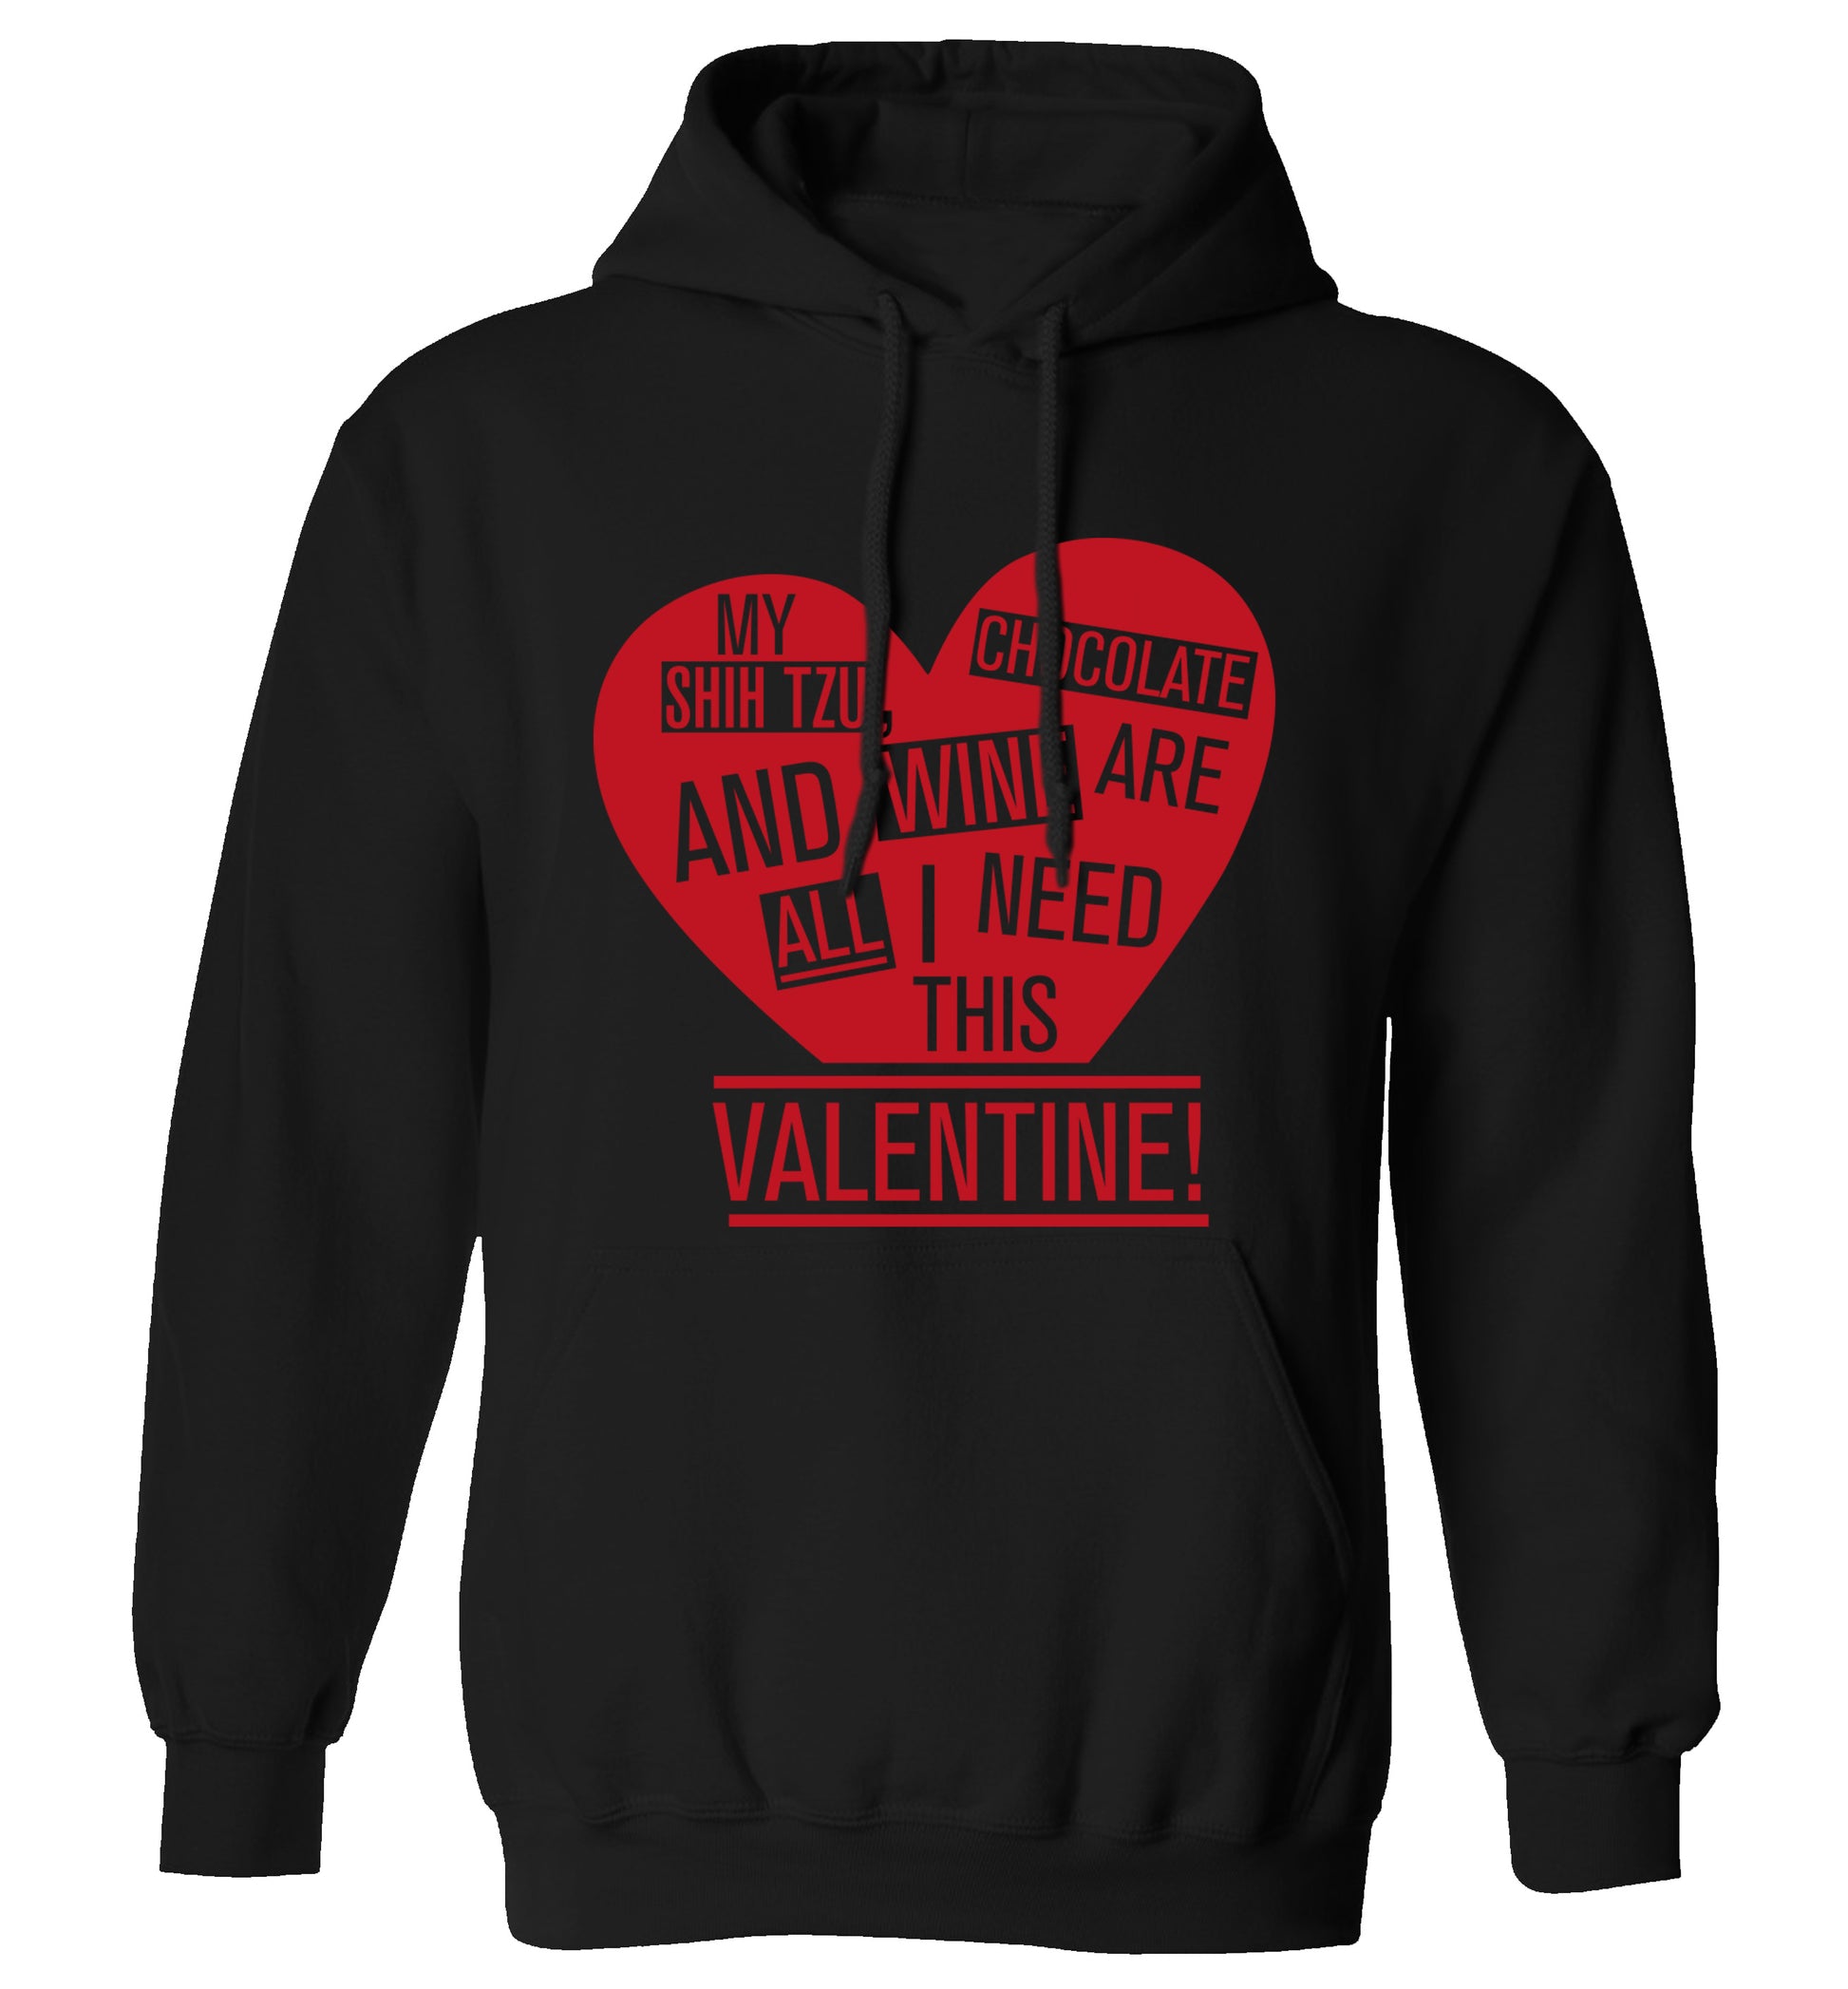 My shih tzu, chocolate and wine are all I need this valentine! adults unisex black hoodie 2XL